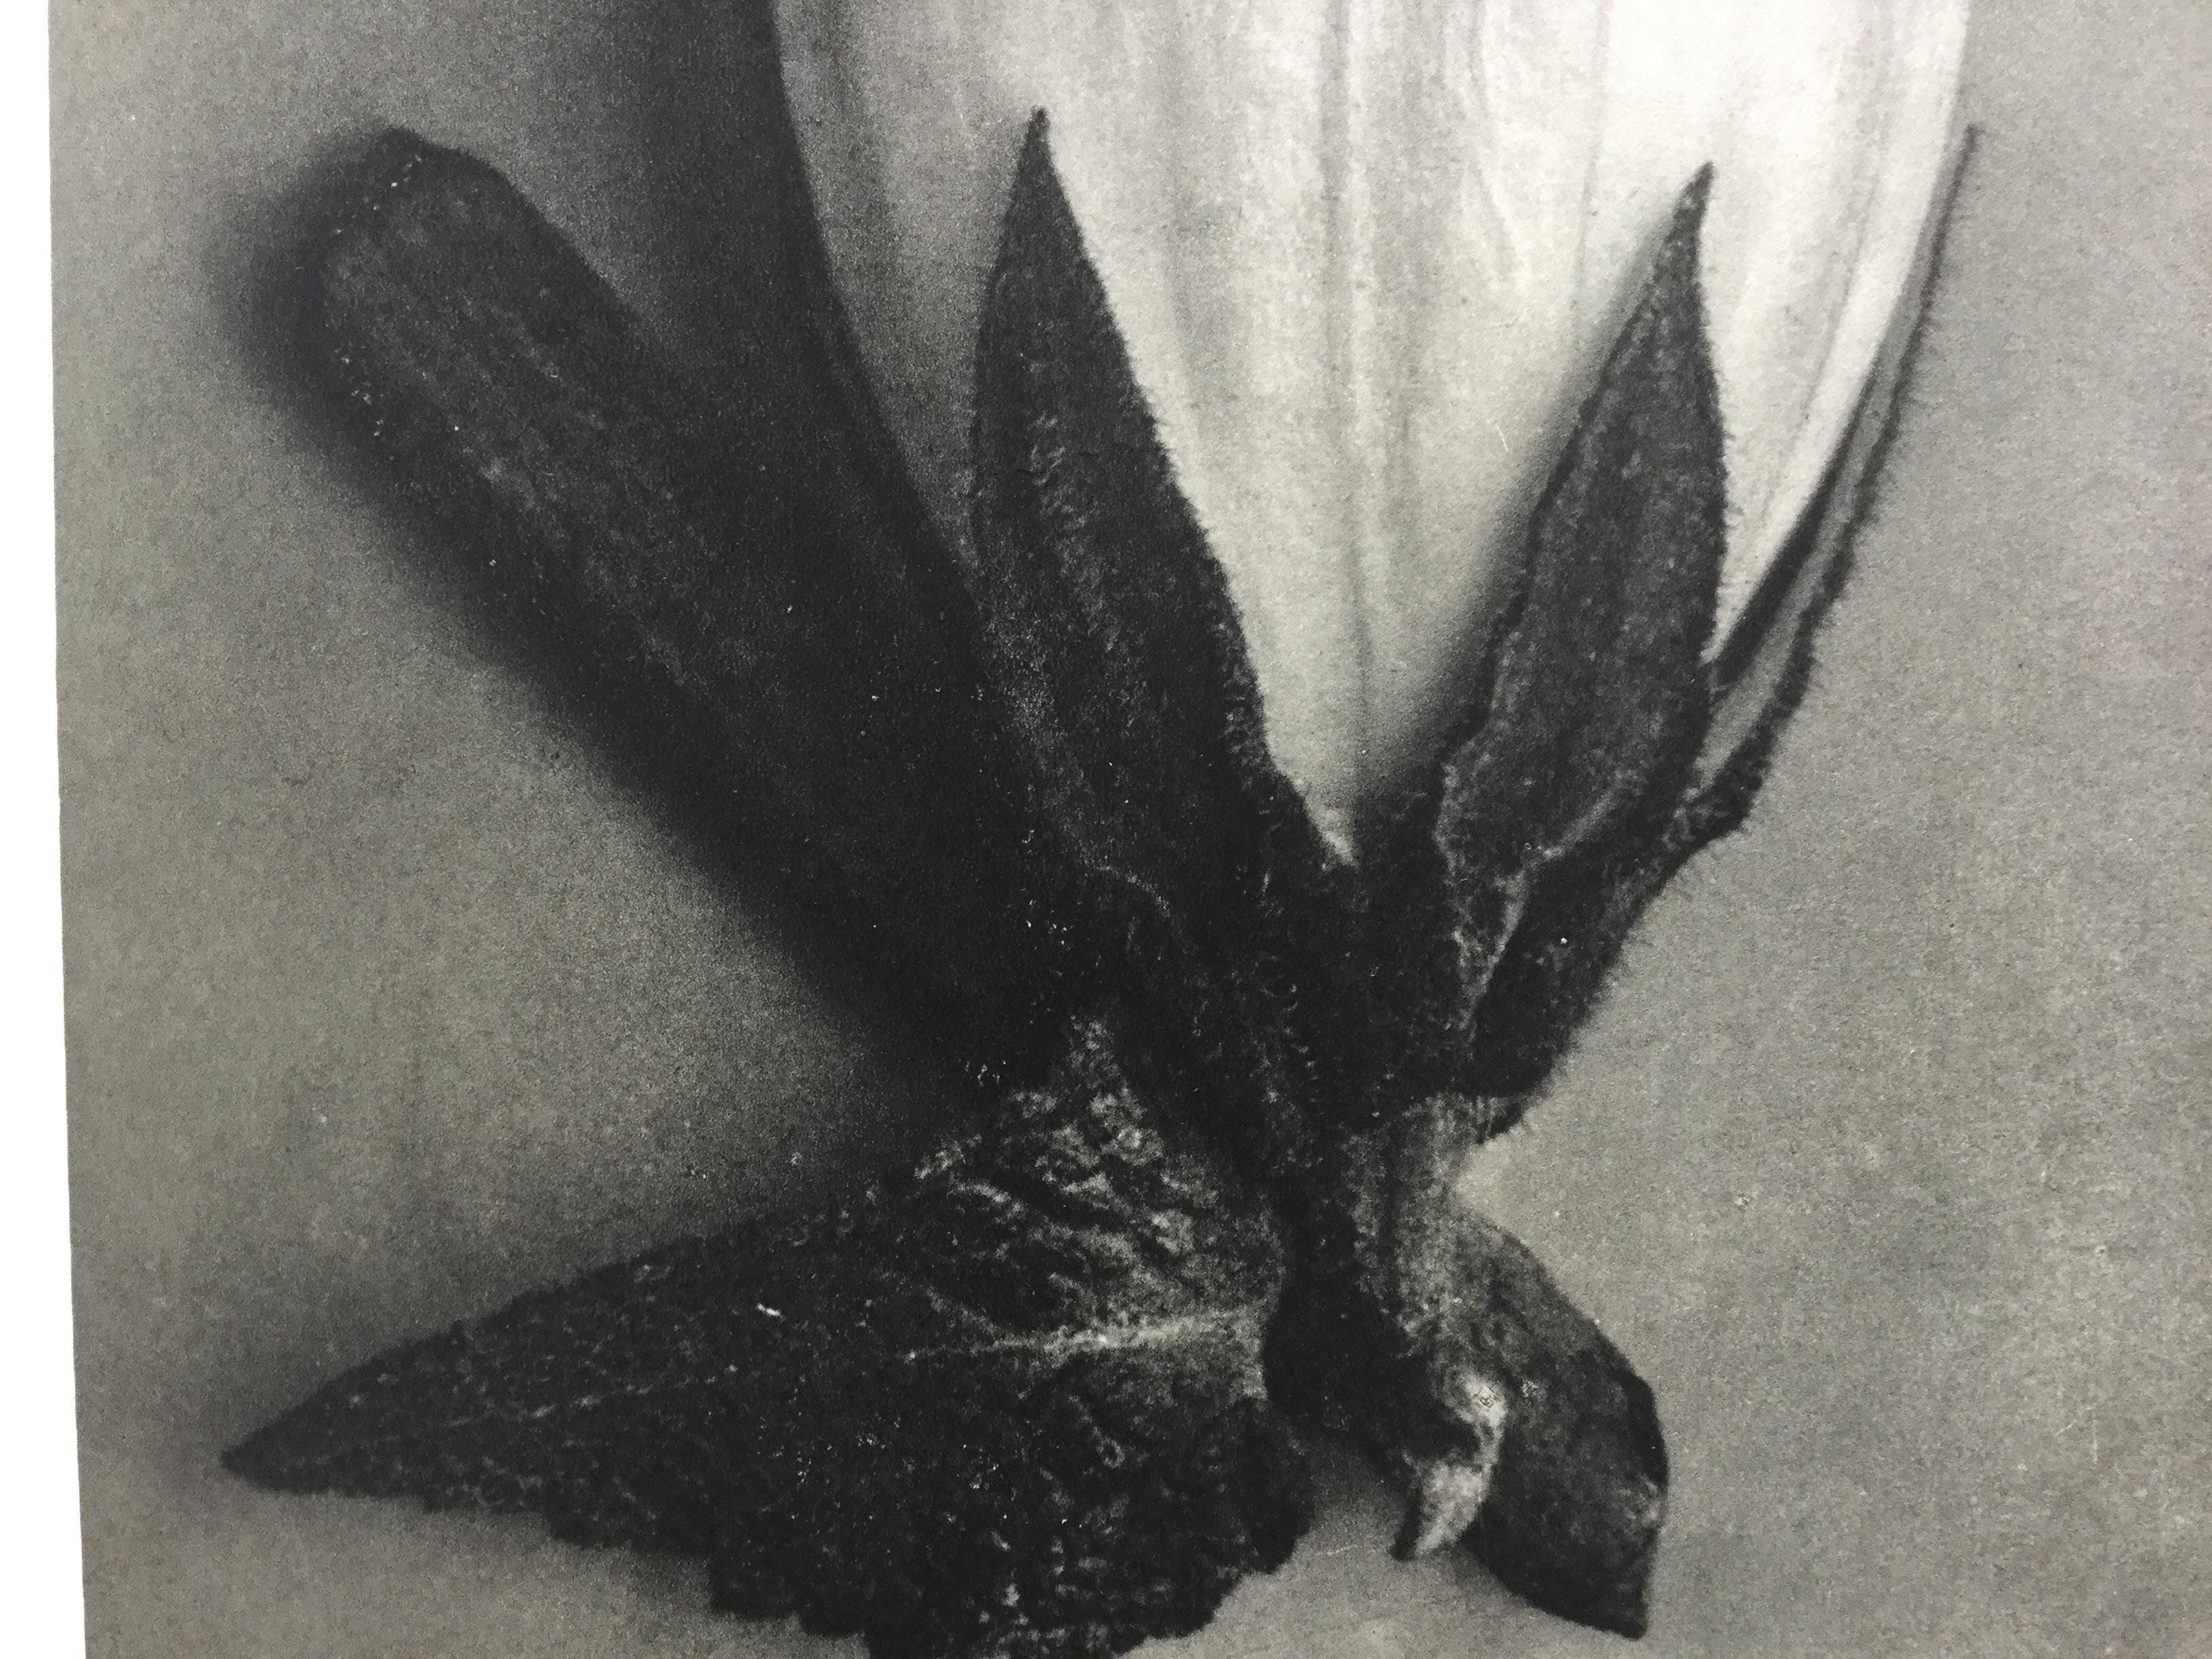 Karl Blossfeldt, 1sr ed. 1928 Photogravure. This edition has the best resolution. The images are near perfect condition. These are the gravure to collect.